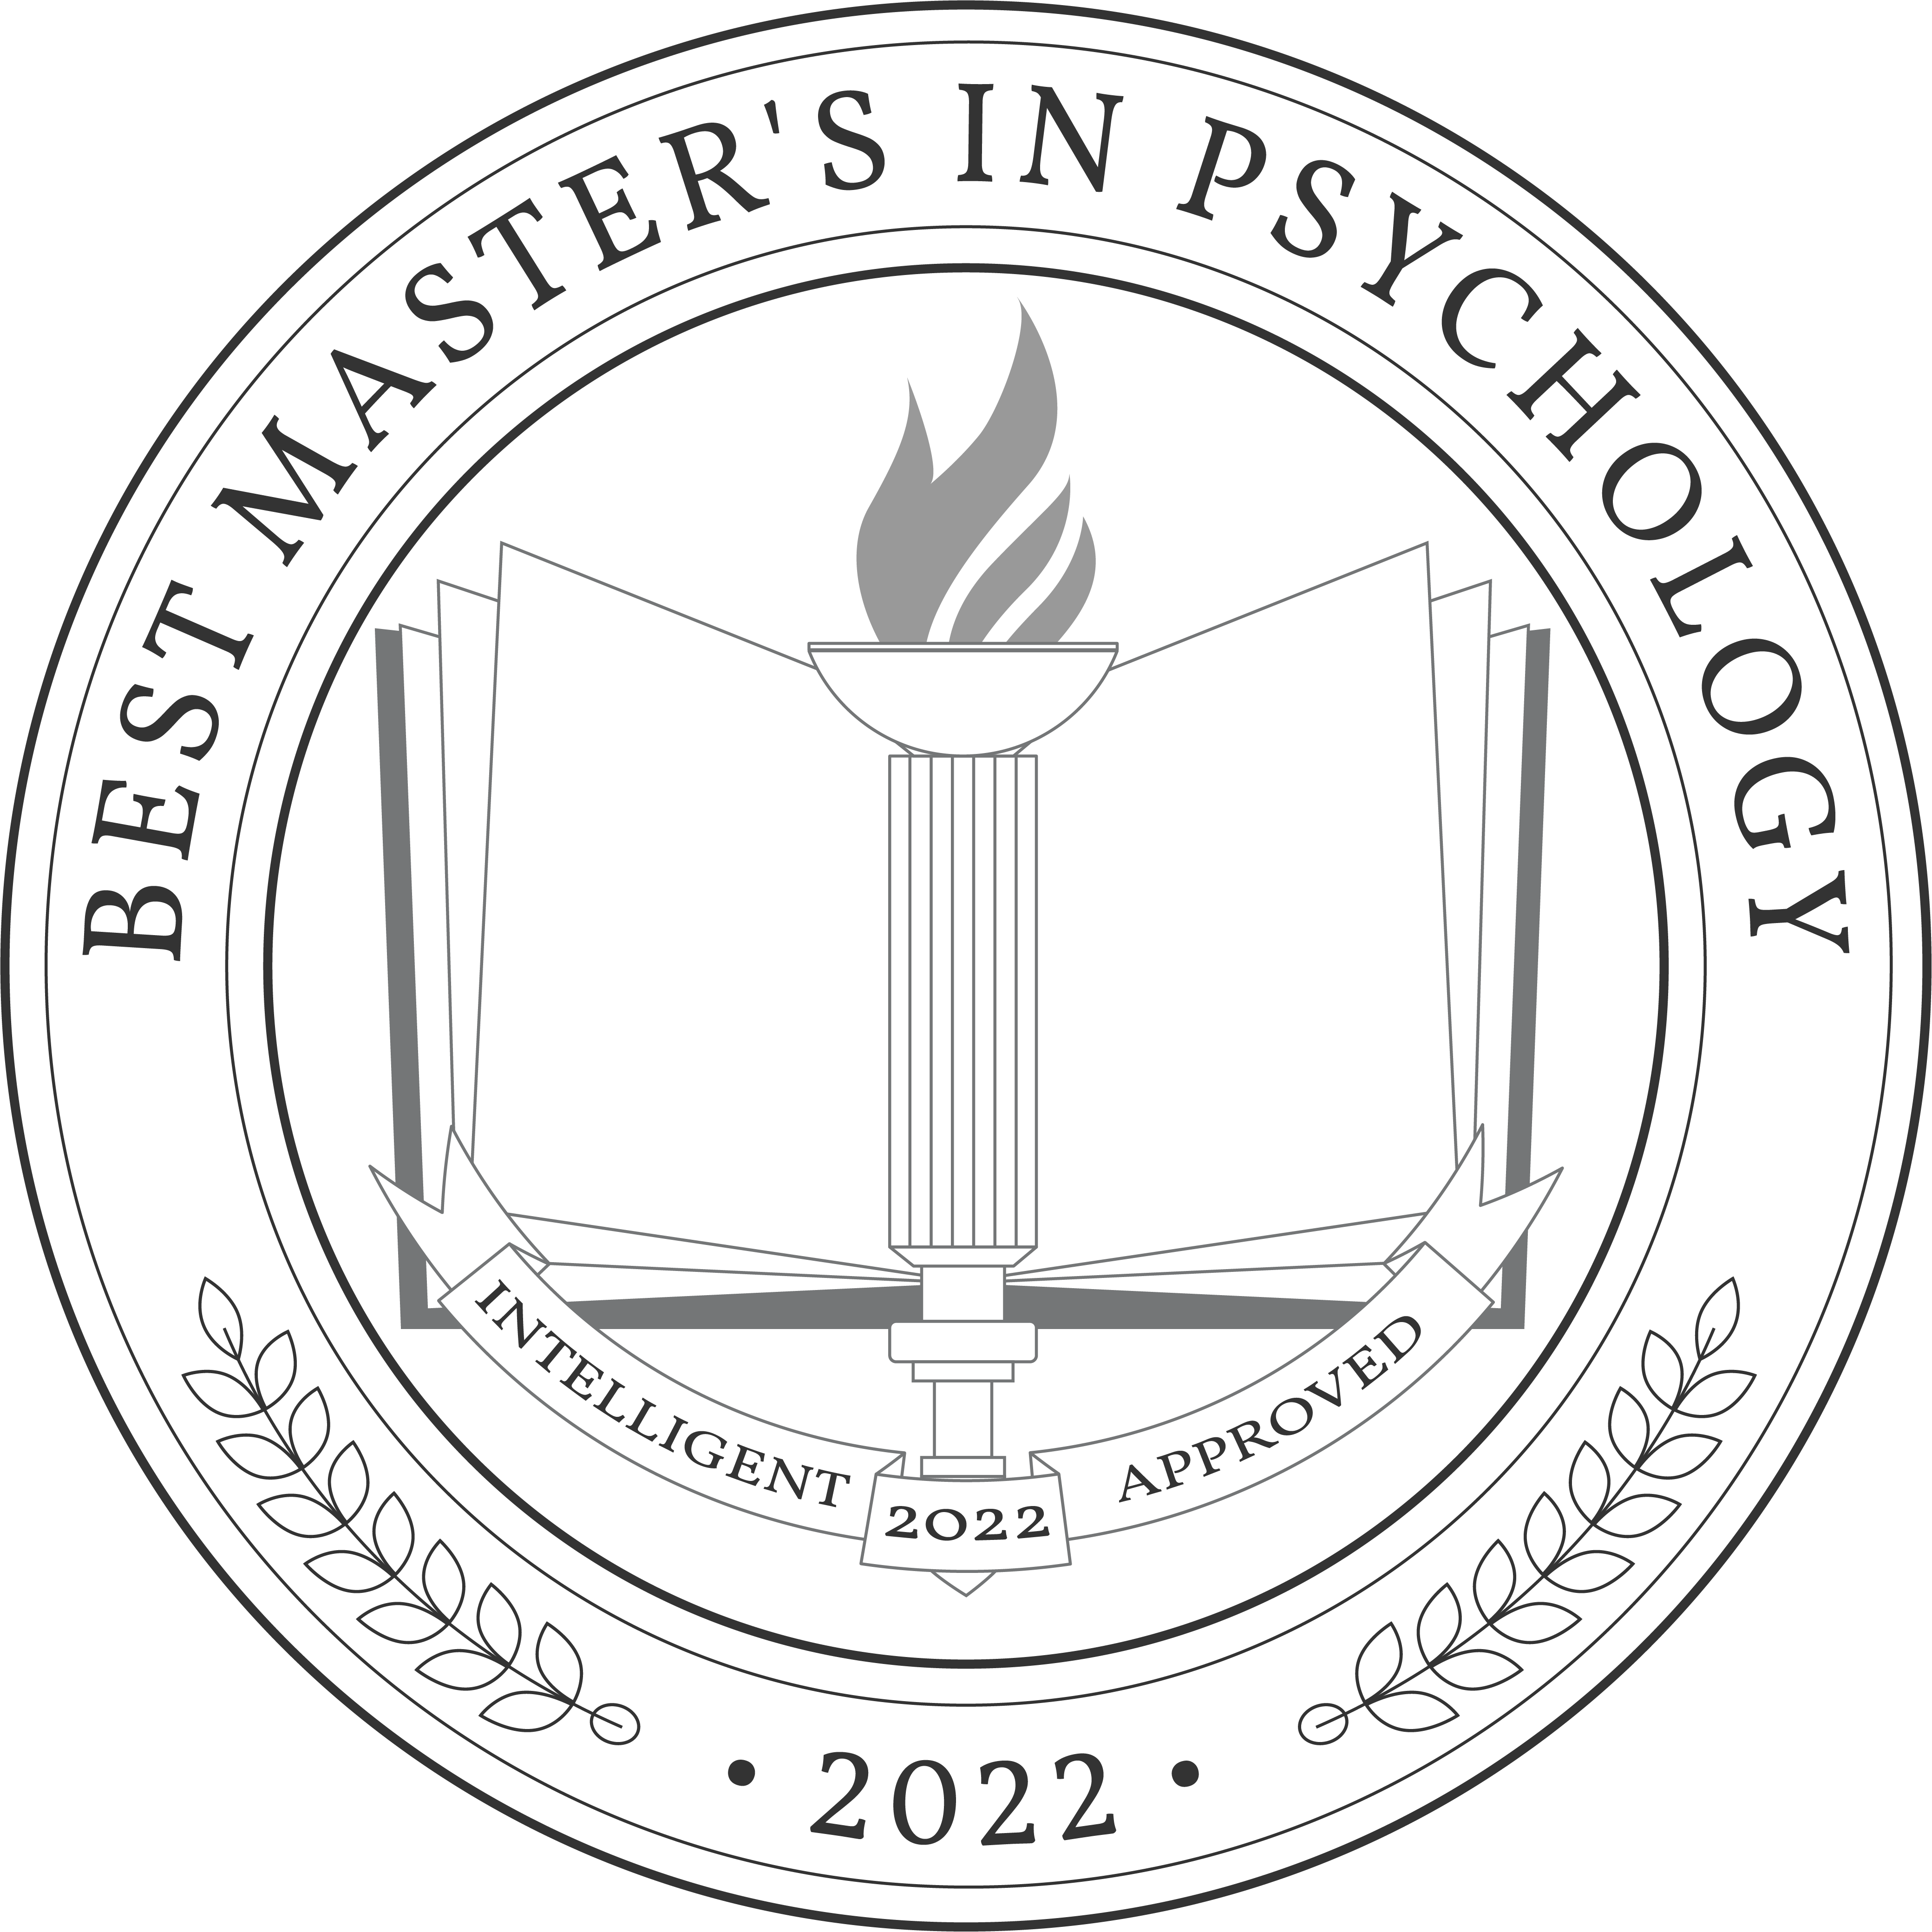 Best-Masters-in-Psychology-Badge.png